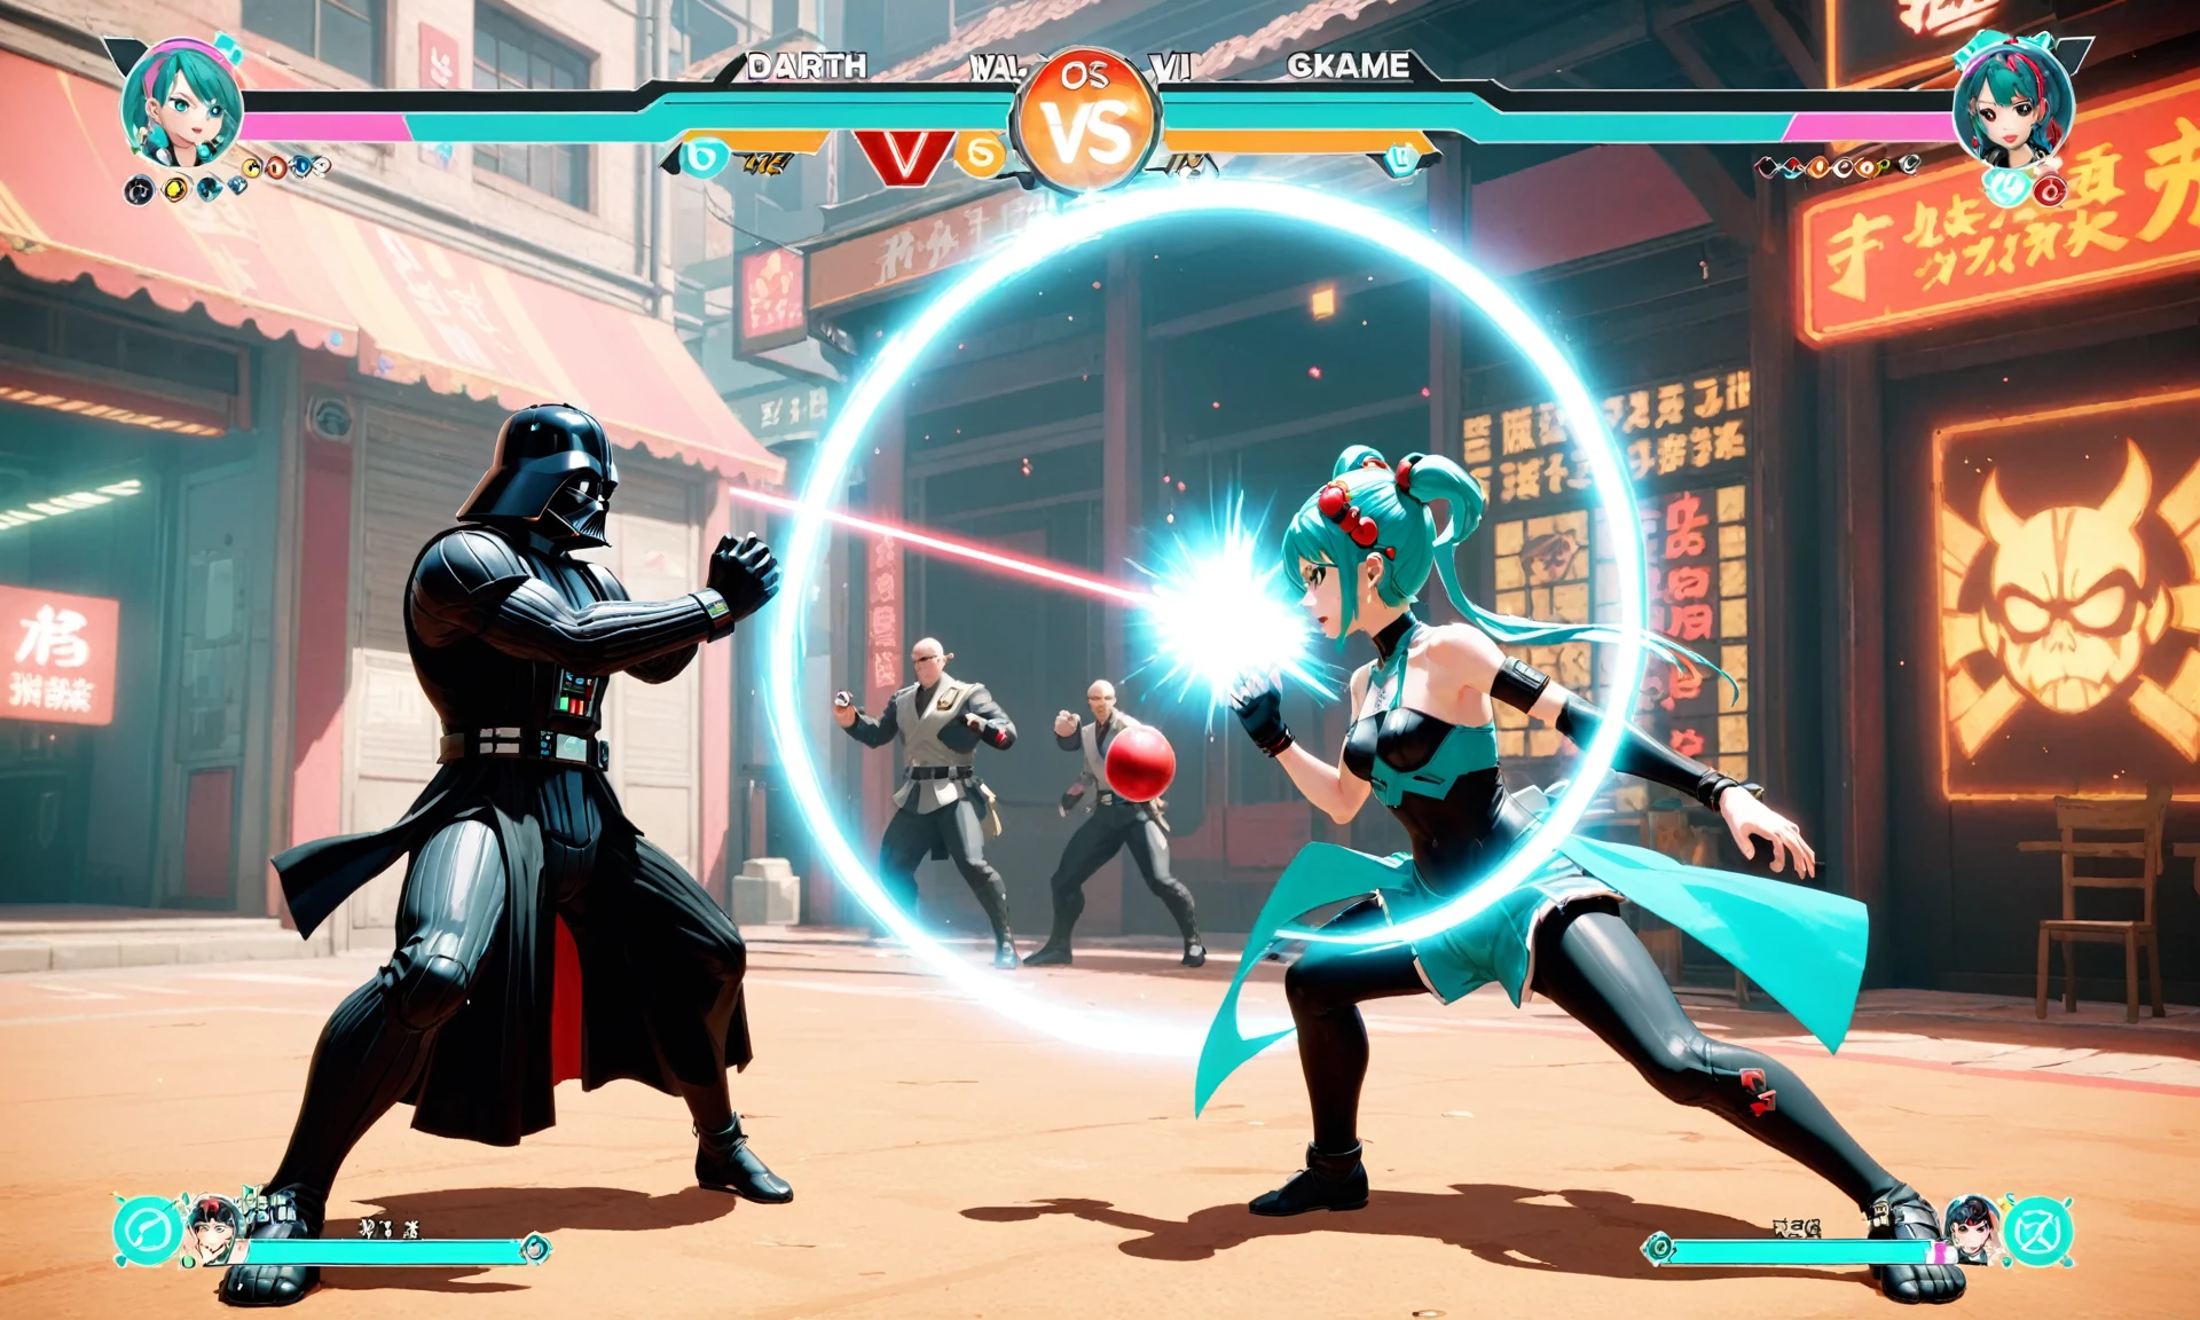 A video game featuring a female character in a blue dress fighting a male character dressed as Darth Vader. The female character is holding a ball, and they are both surrounded by a circle of fire.